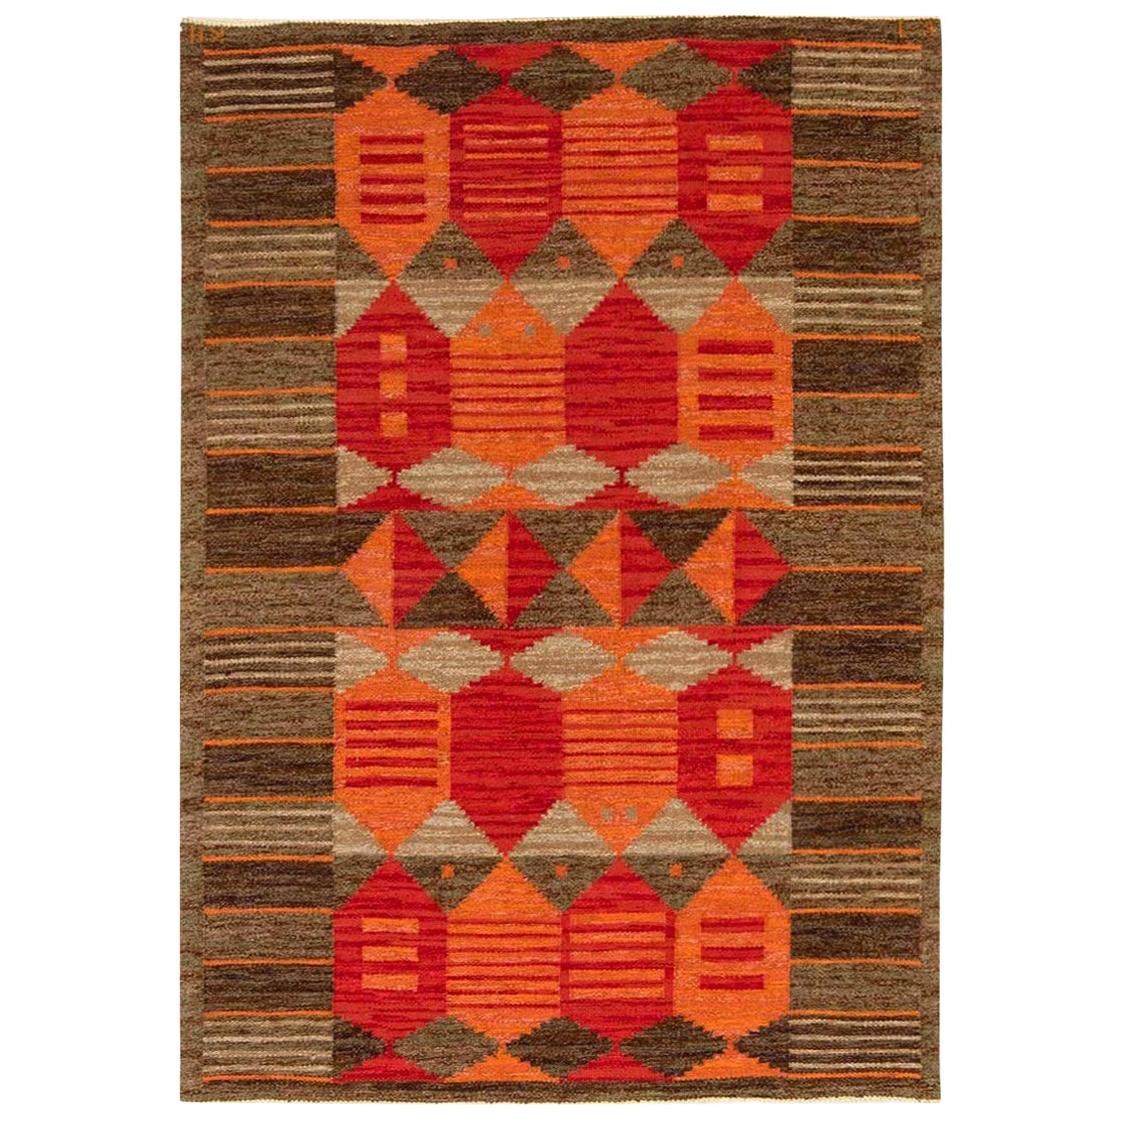 Midcentury Swedish Red, Orange and Brown Flat-Woven Rug by Karin Jönsson